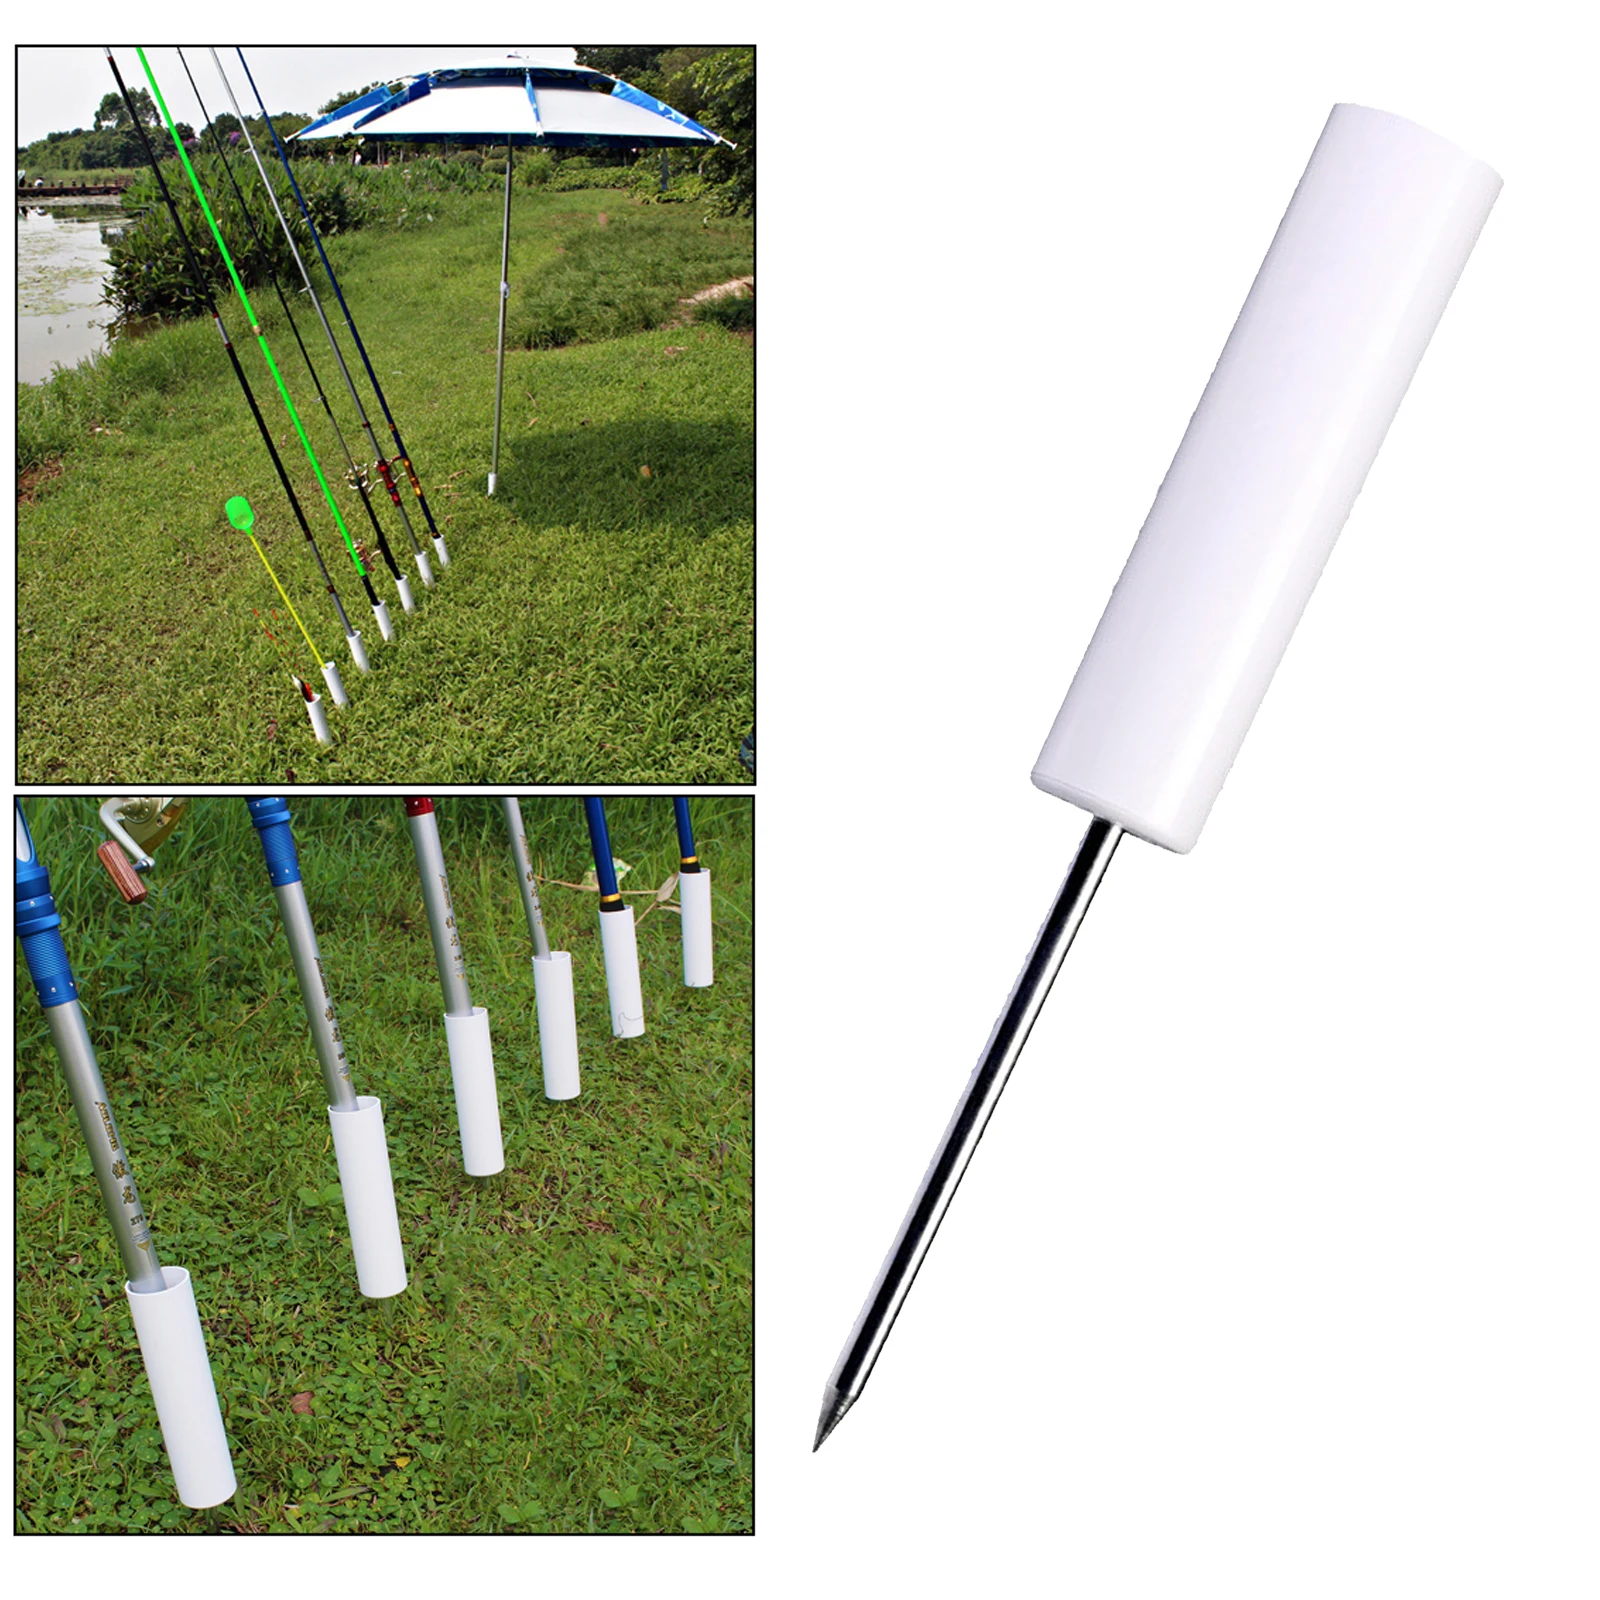 Fishing Rod Pole Holder Ground Support Reinforced PVC Detachable Fishing